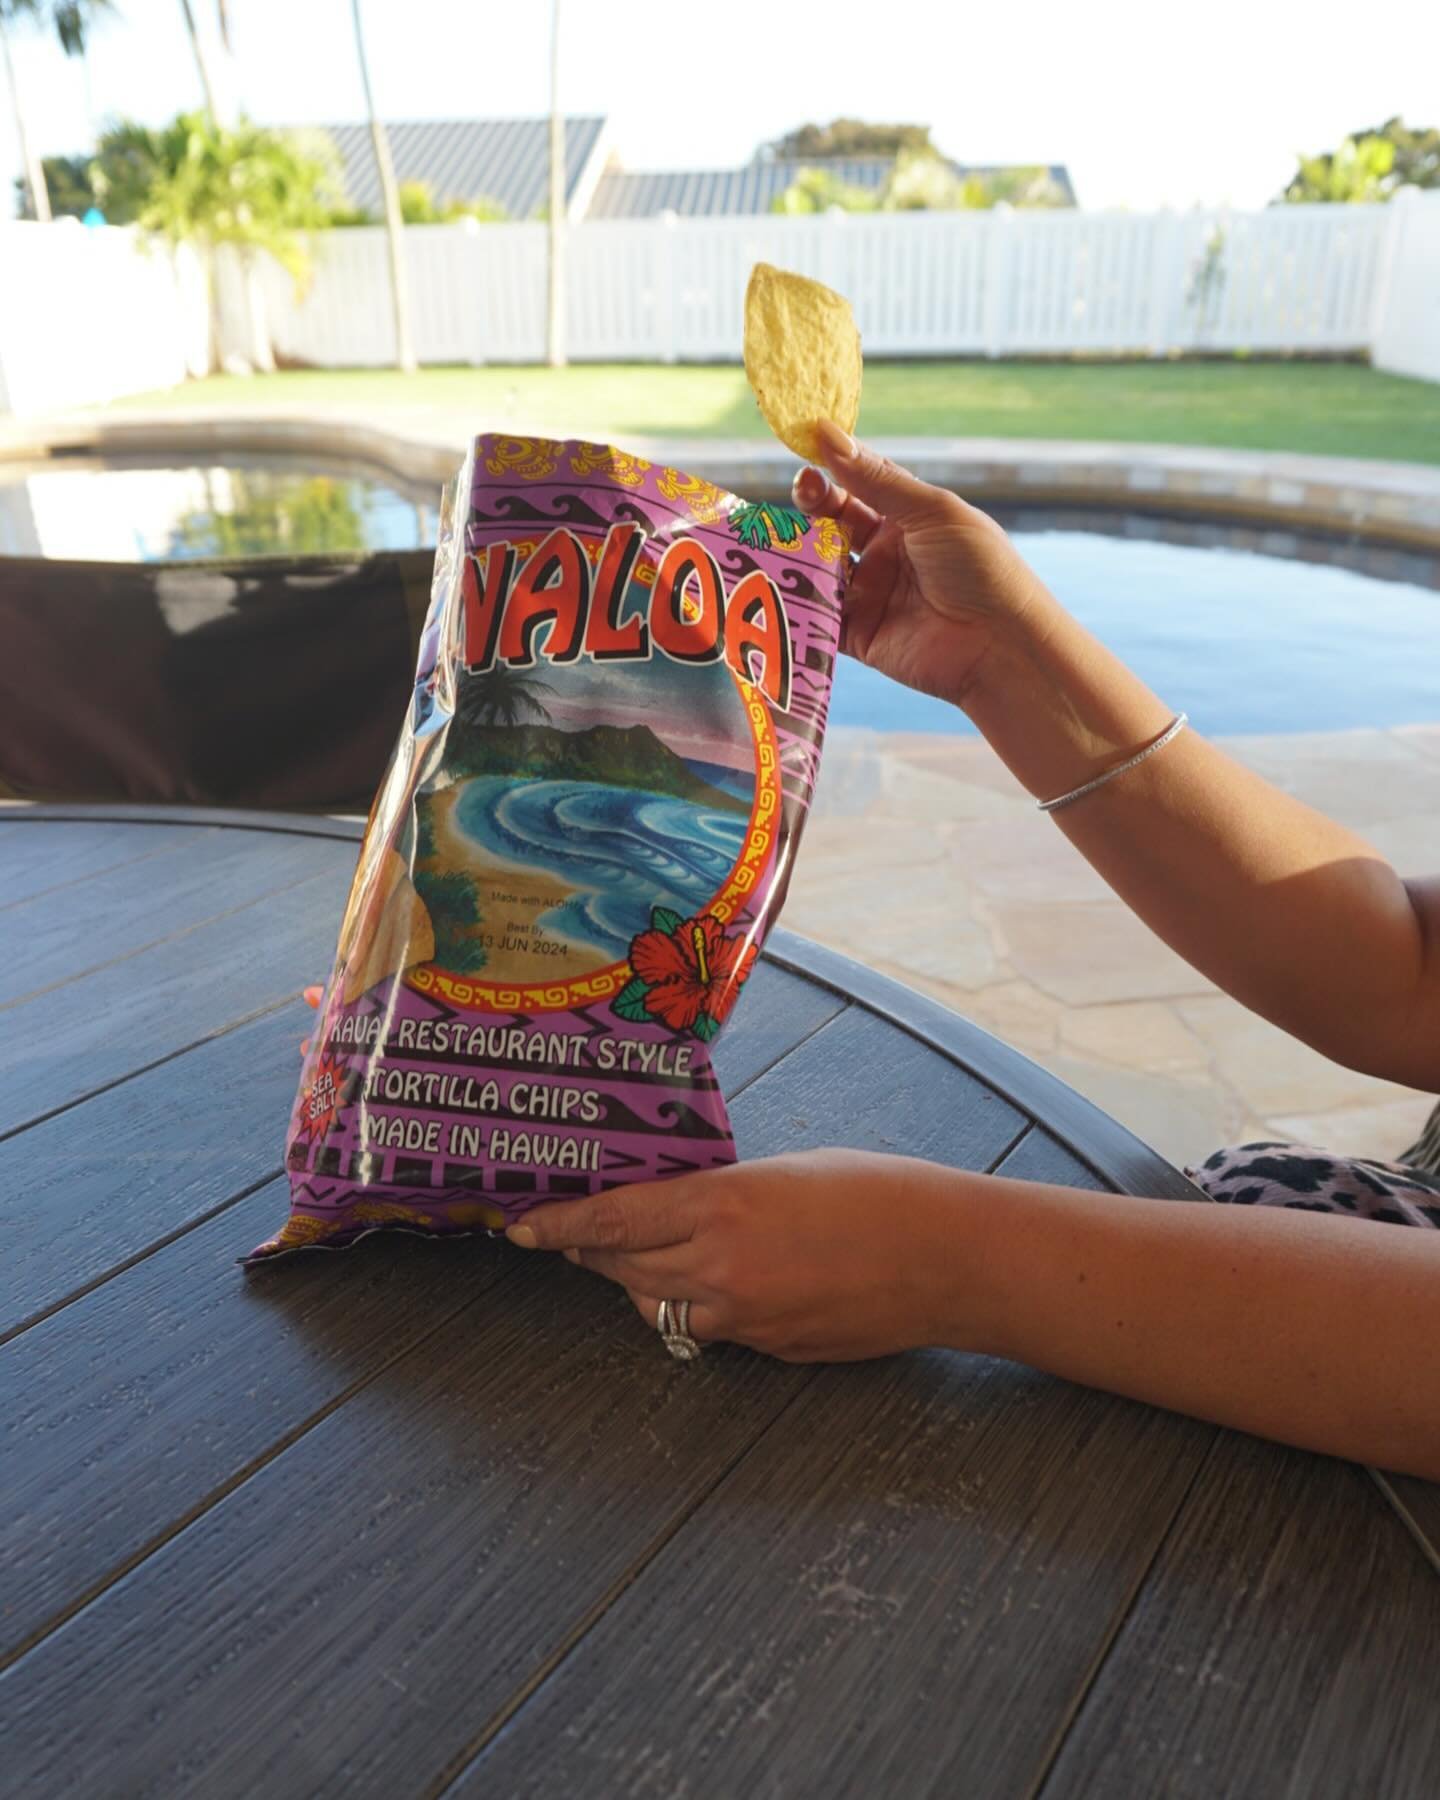 Dipping into the weekend like a Sinaloa tortilla chip by the pool. Crispy vibes and sunny skies☀️🌊
.
.
.
.
#sinaloatortillas #sinaloatortillashi #hawaii #oahu #PoolsideSnacks #SinaloaChips